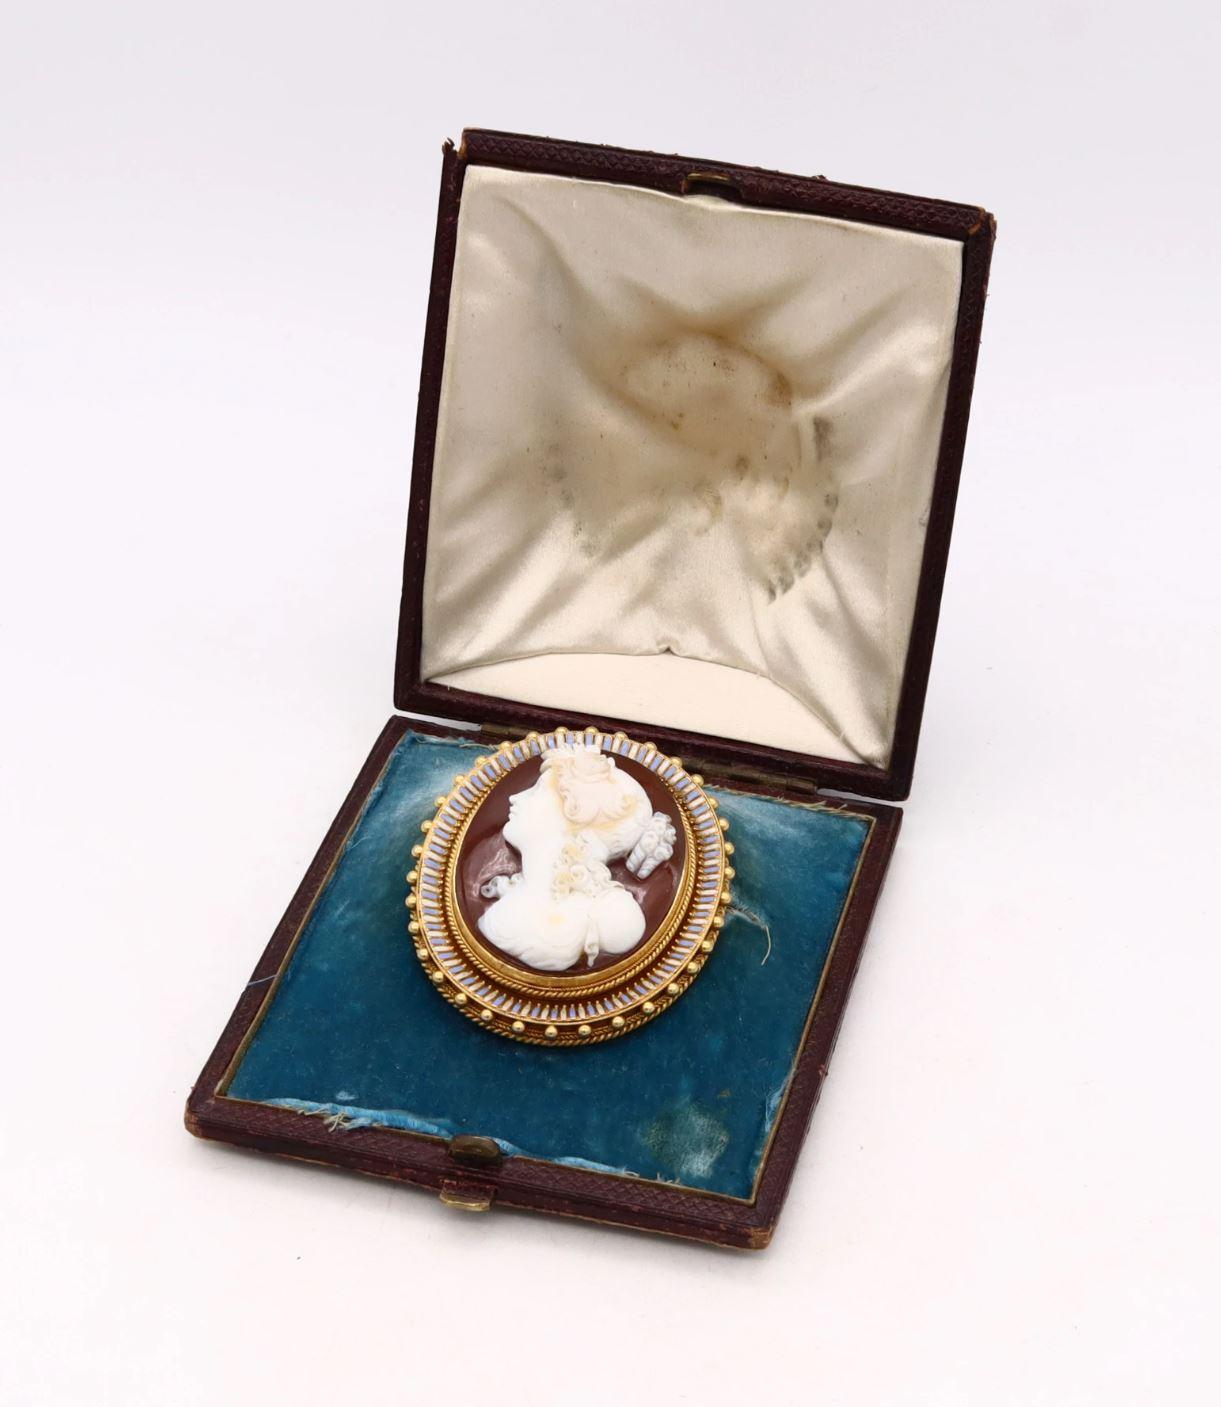 Viennese 1840 Etruscan revival agate cameo of Flora.

This fabulous rare Austrian piece features a tree-dimensional cameo piece, carved from two layers of natural agate, with gradations of colors; from translucent orange brown to frosted white with